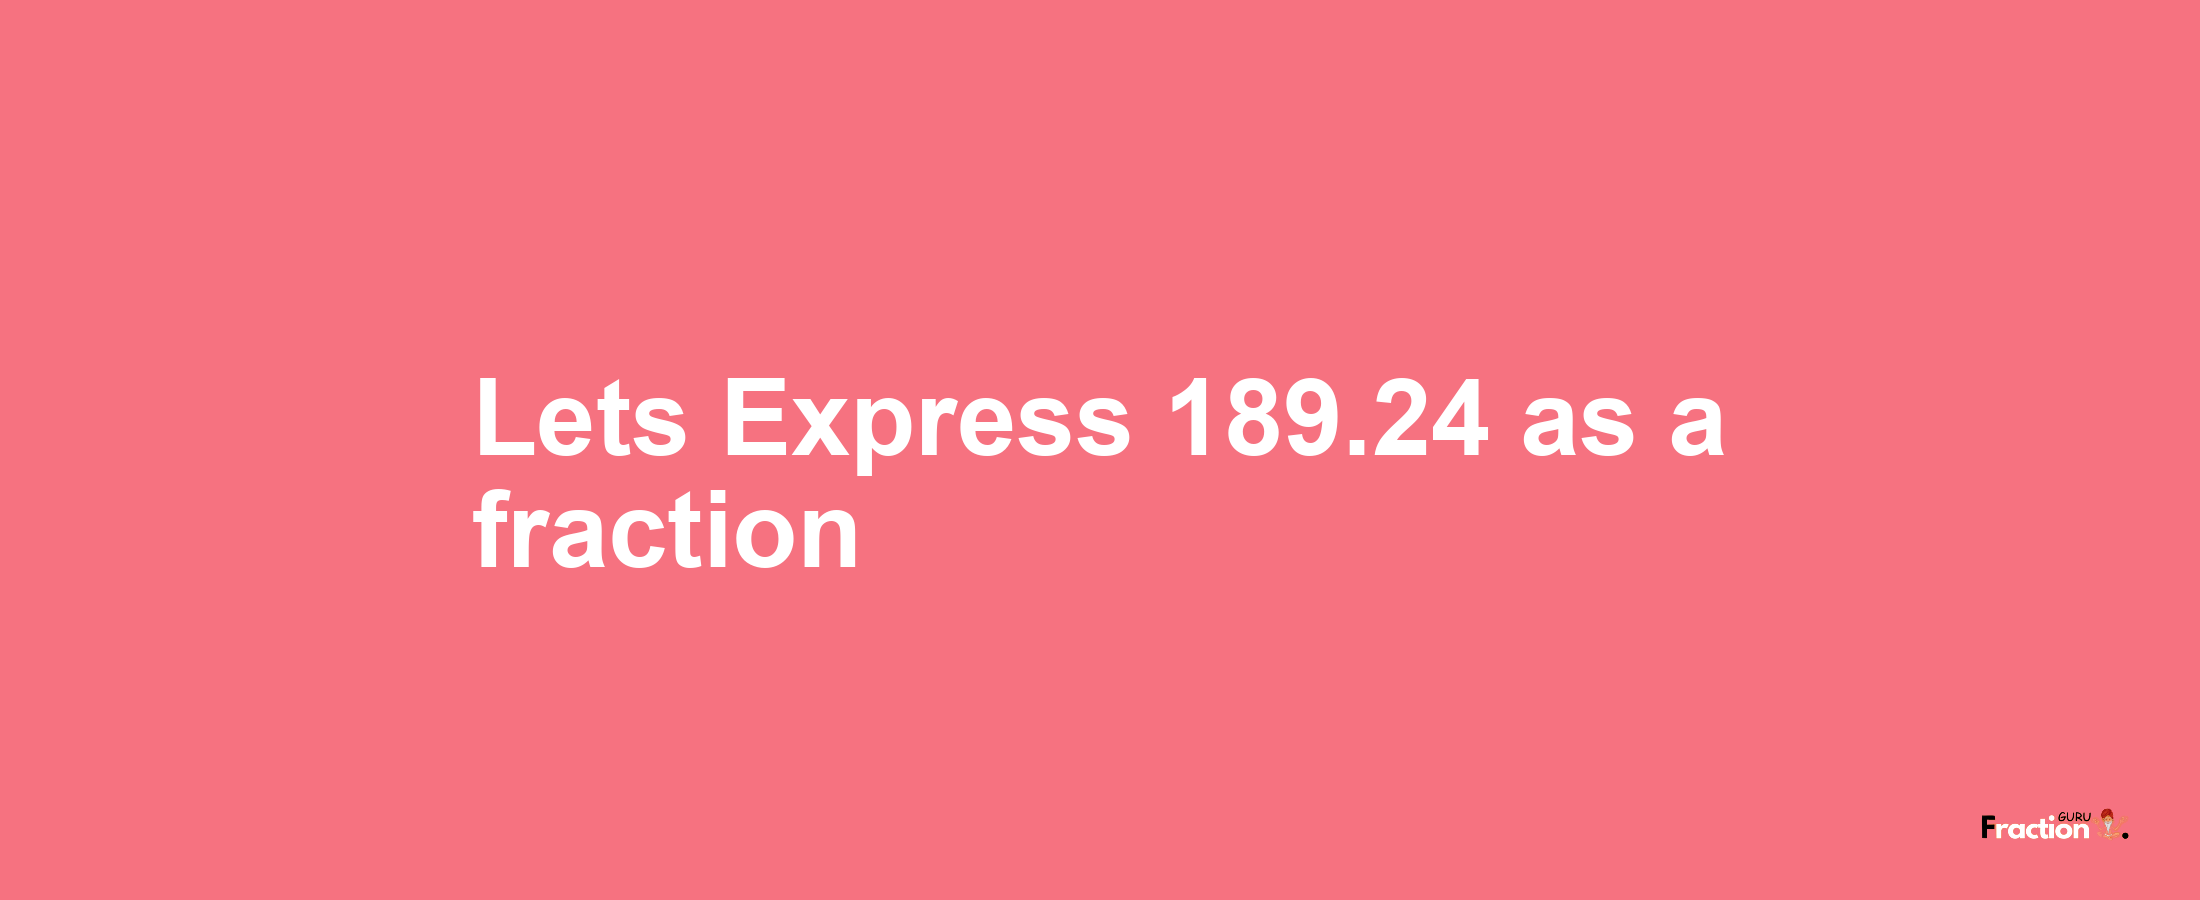 Lets Express 189.24 as afraction